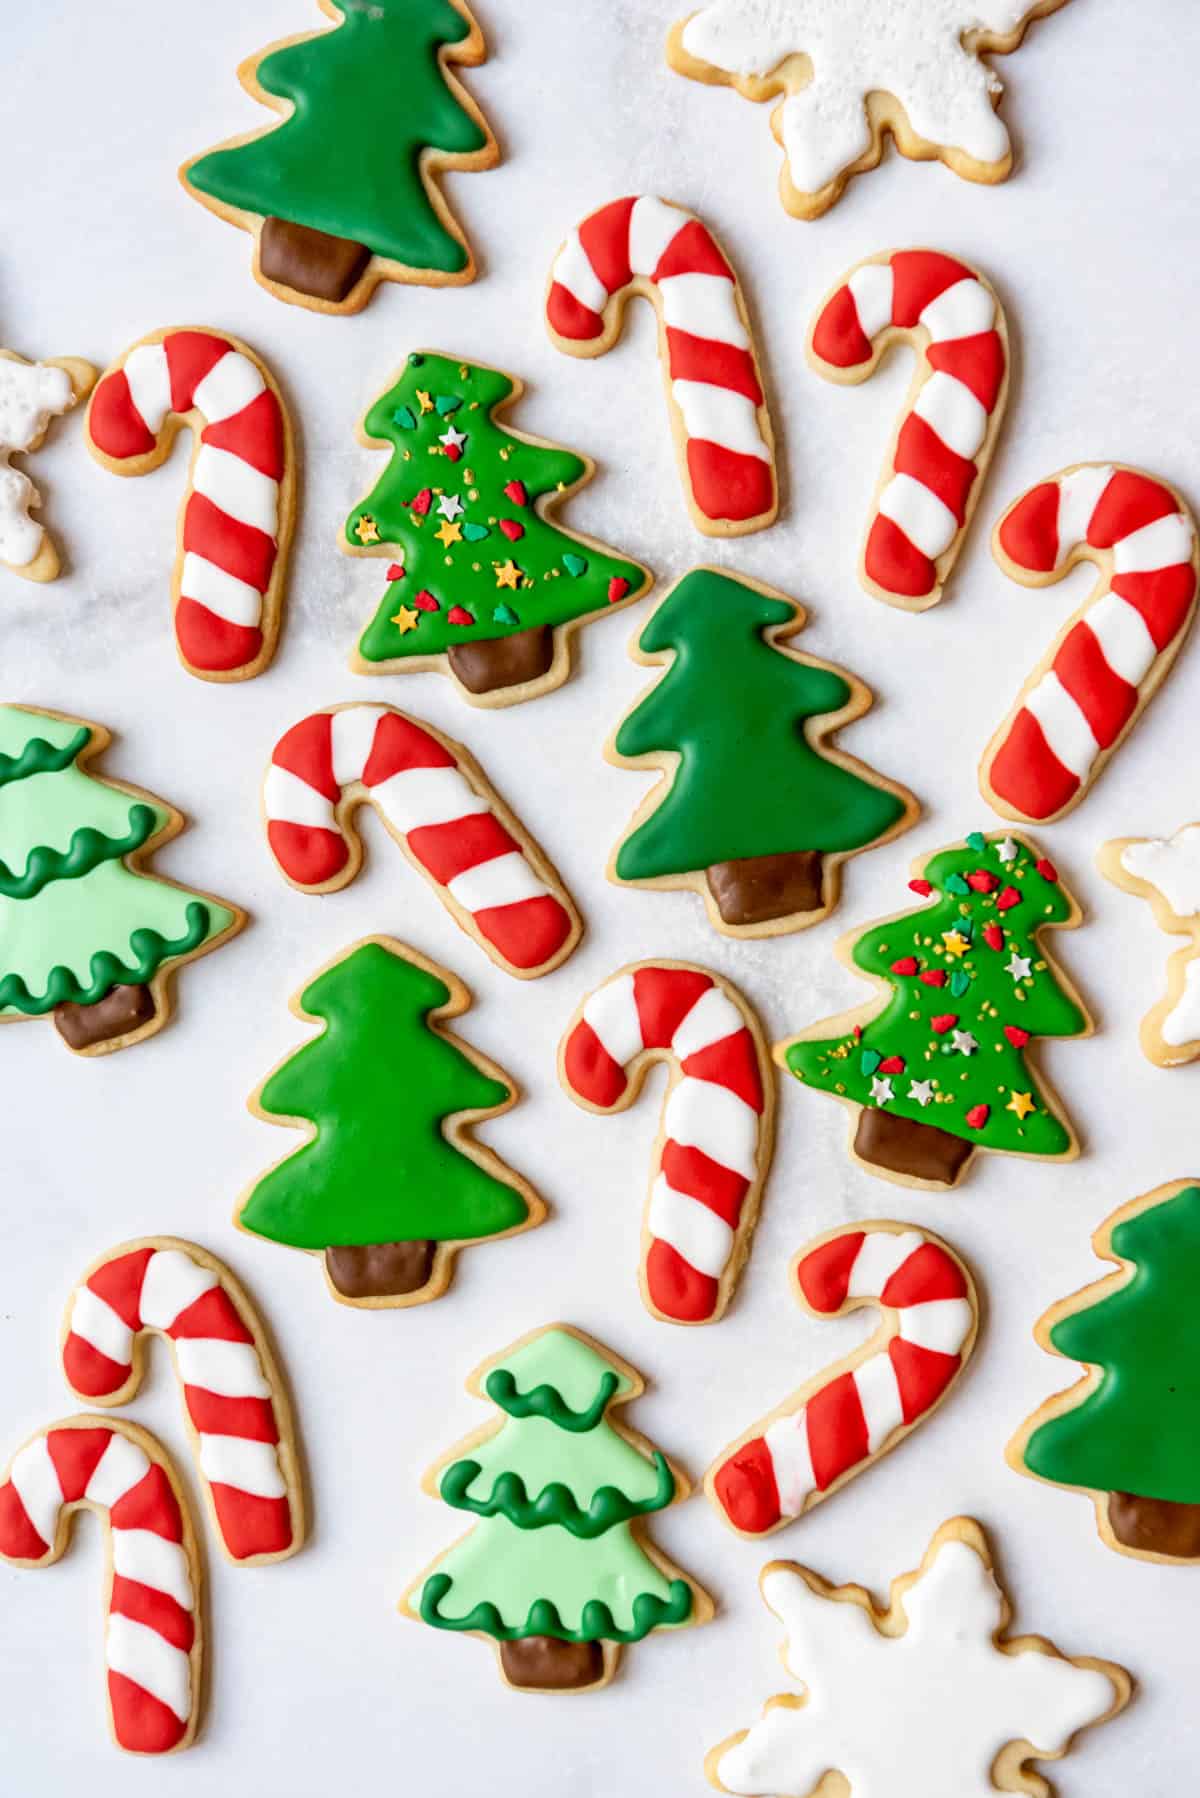 Candy cane and Christmas tree decorated sugar cookies with royal icing and sprinkles.